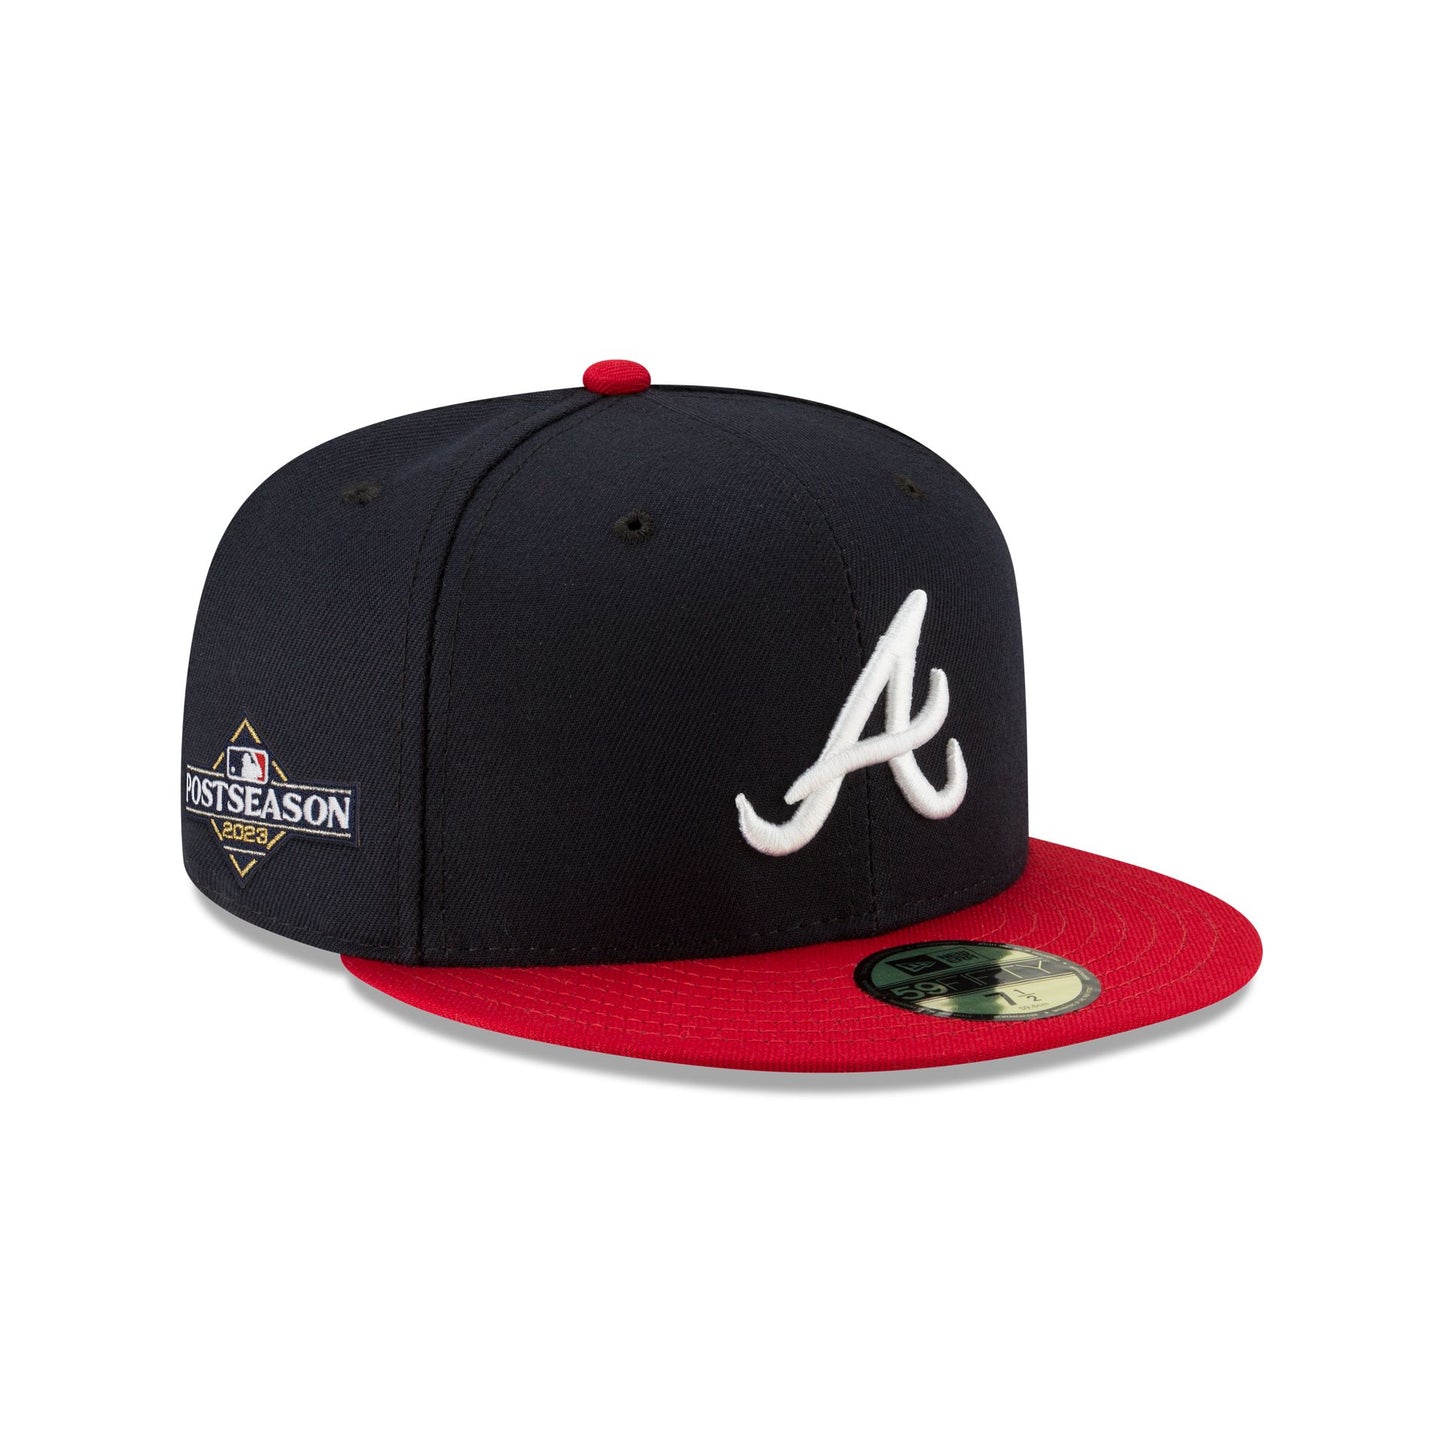 New Era 59Fifty Fitted Cap Pride Atlanta Braves Banned ASG side